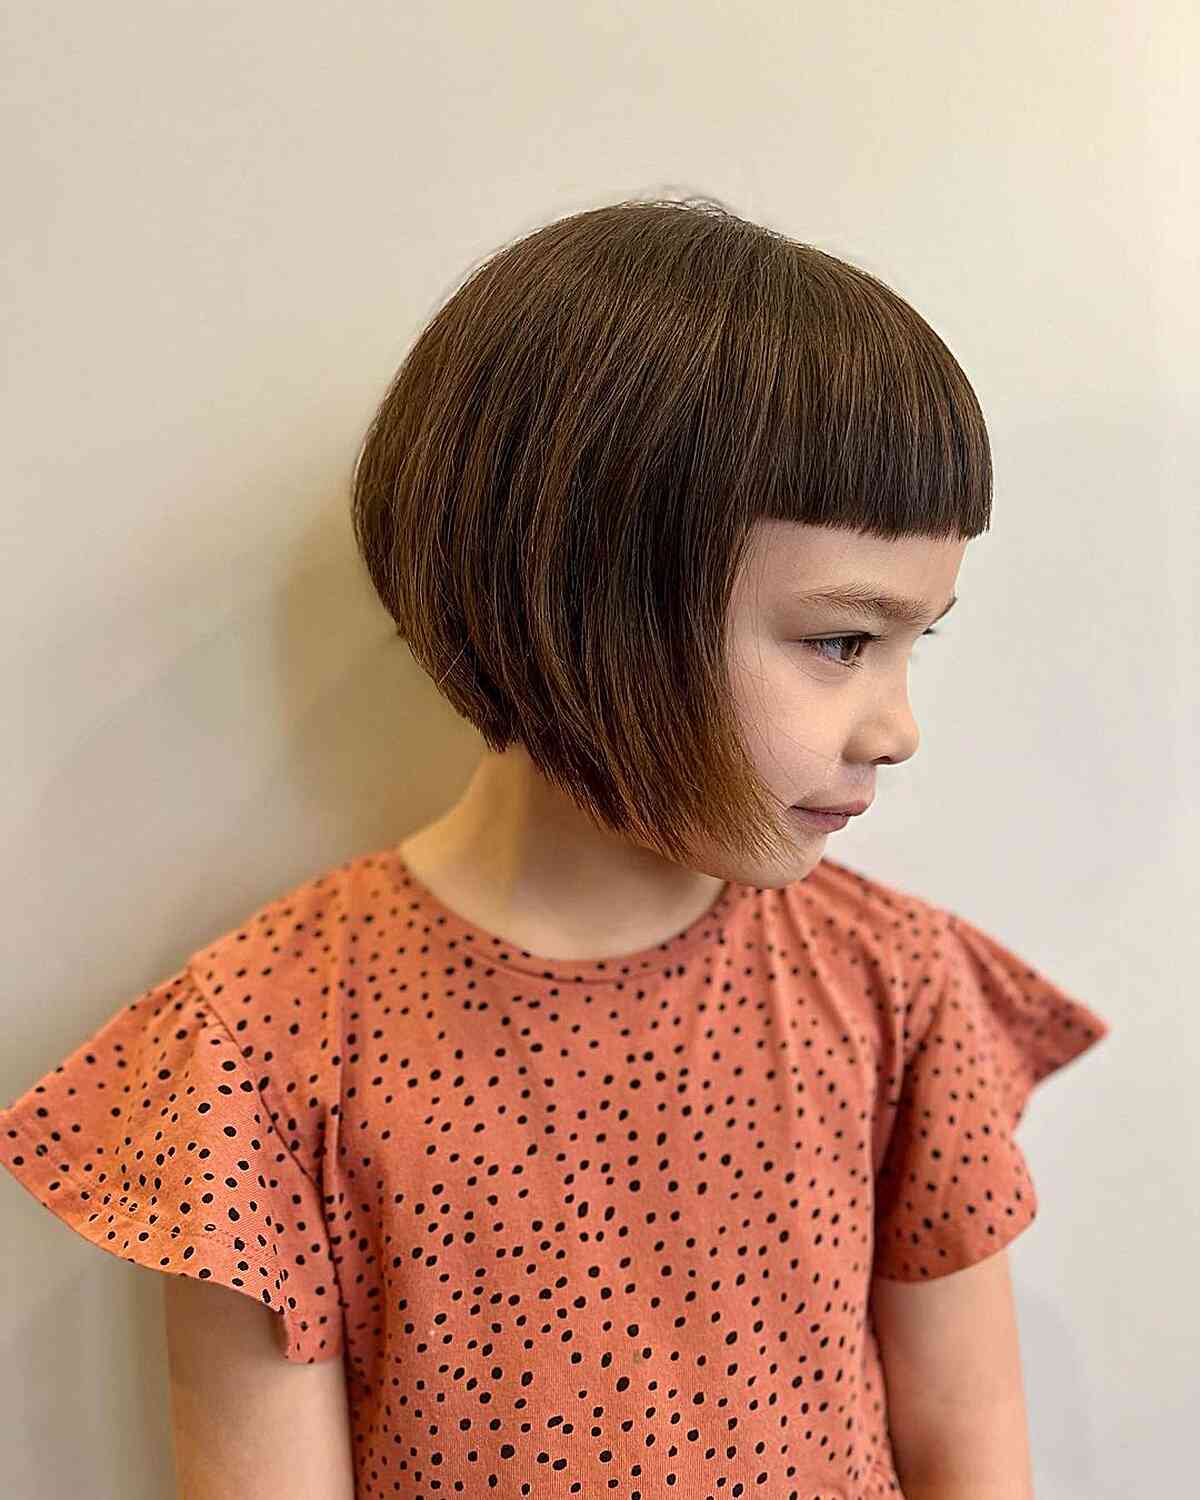 Cutest French Bob Cut for Girls with Short Hair and bangs